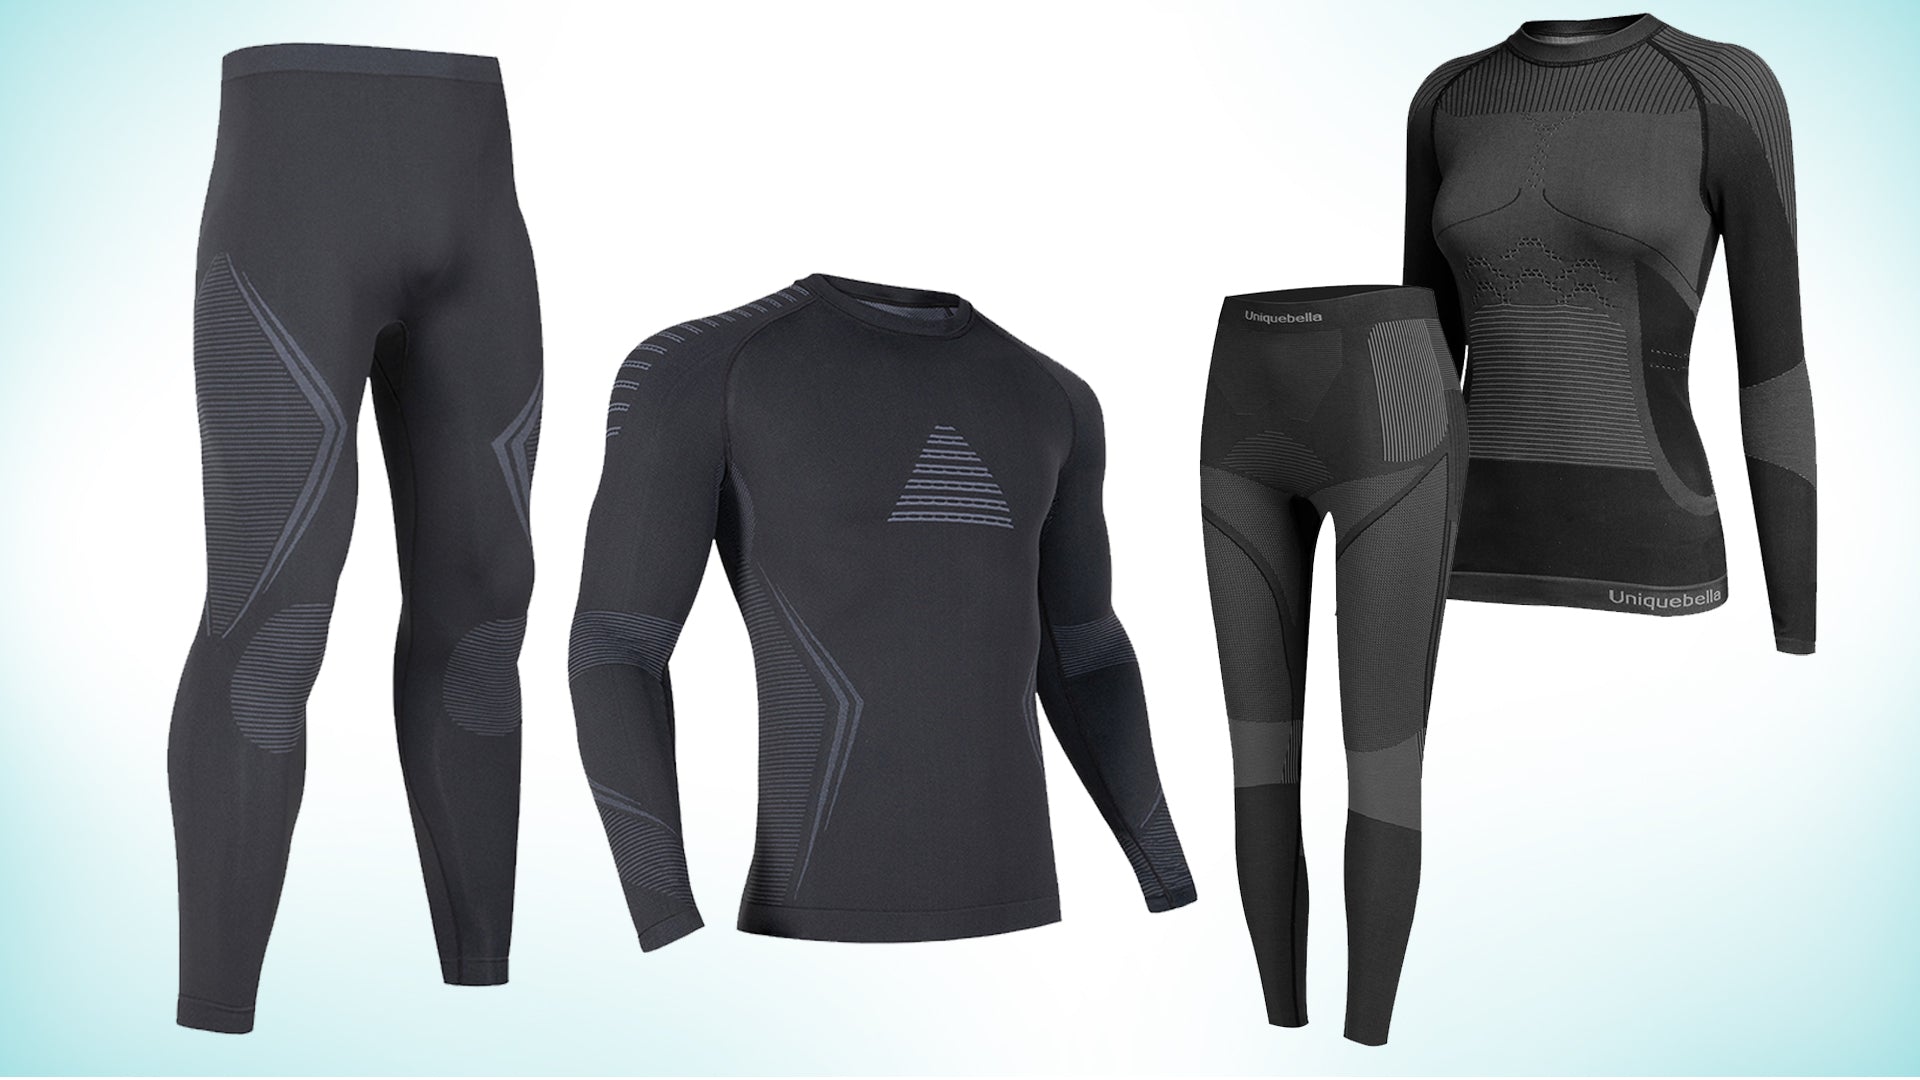 What to look for the best thermal underwear set